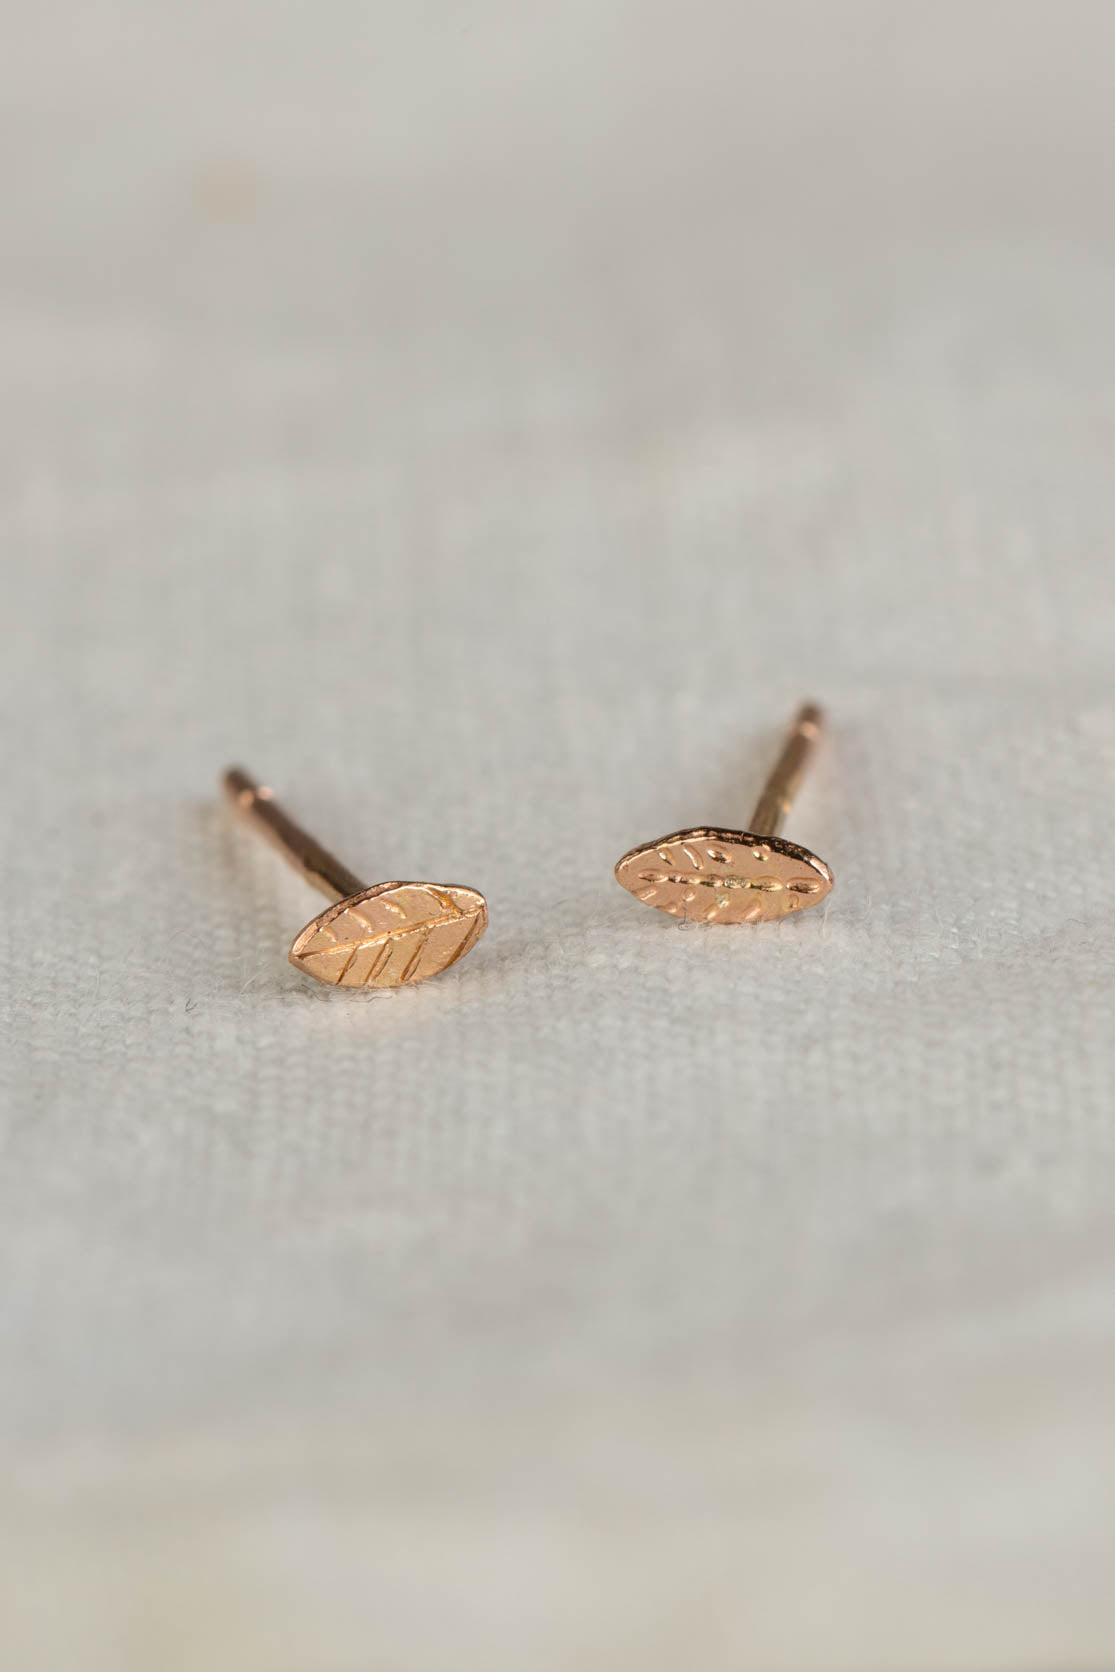 Tiny Leaf Earrings In Solid 18ct Gold